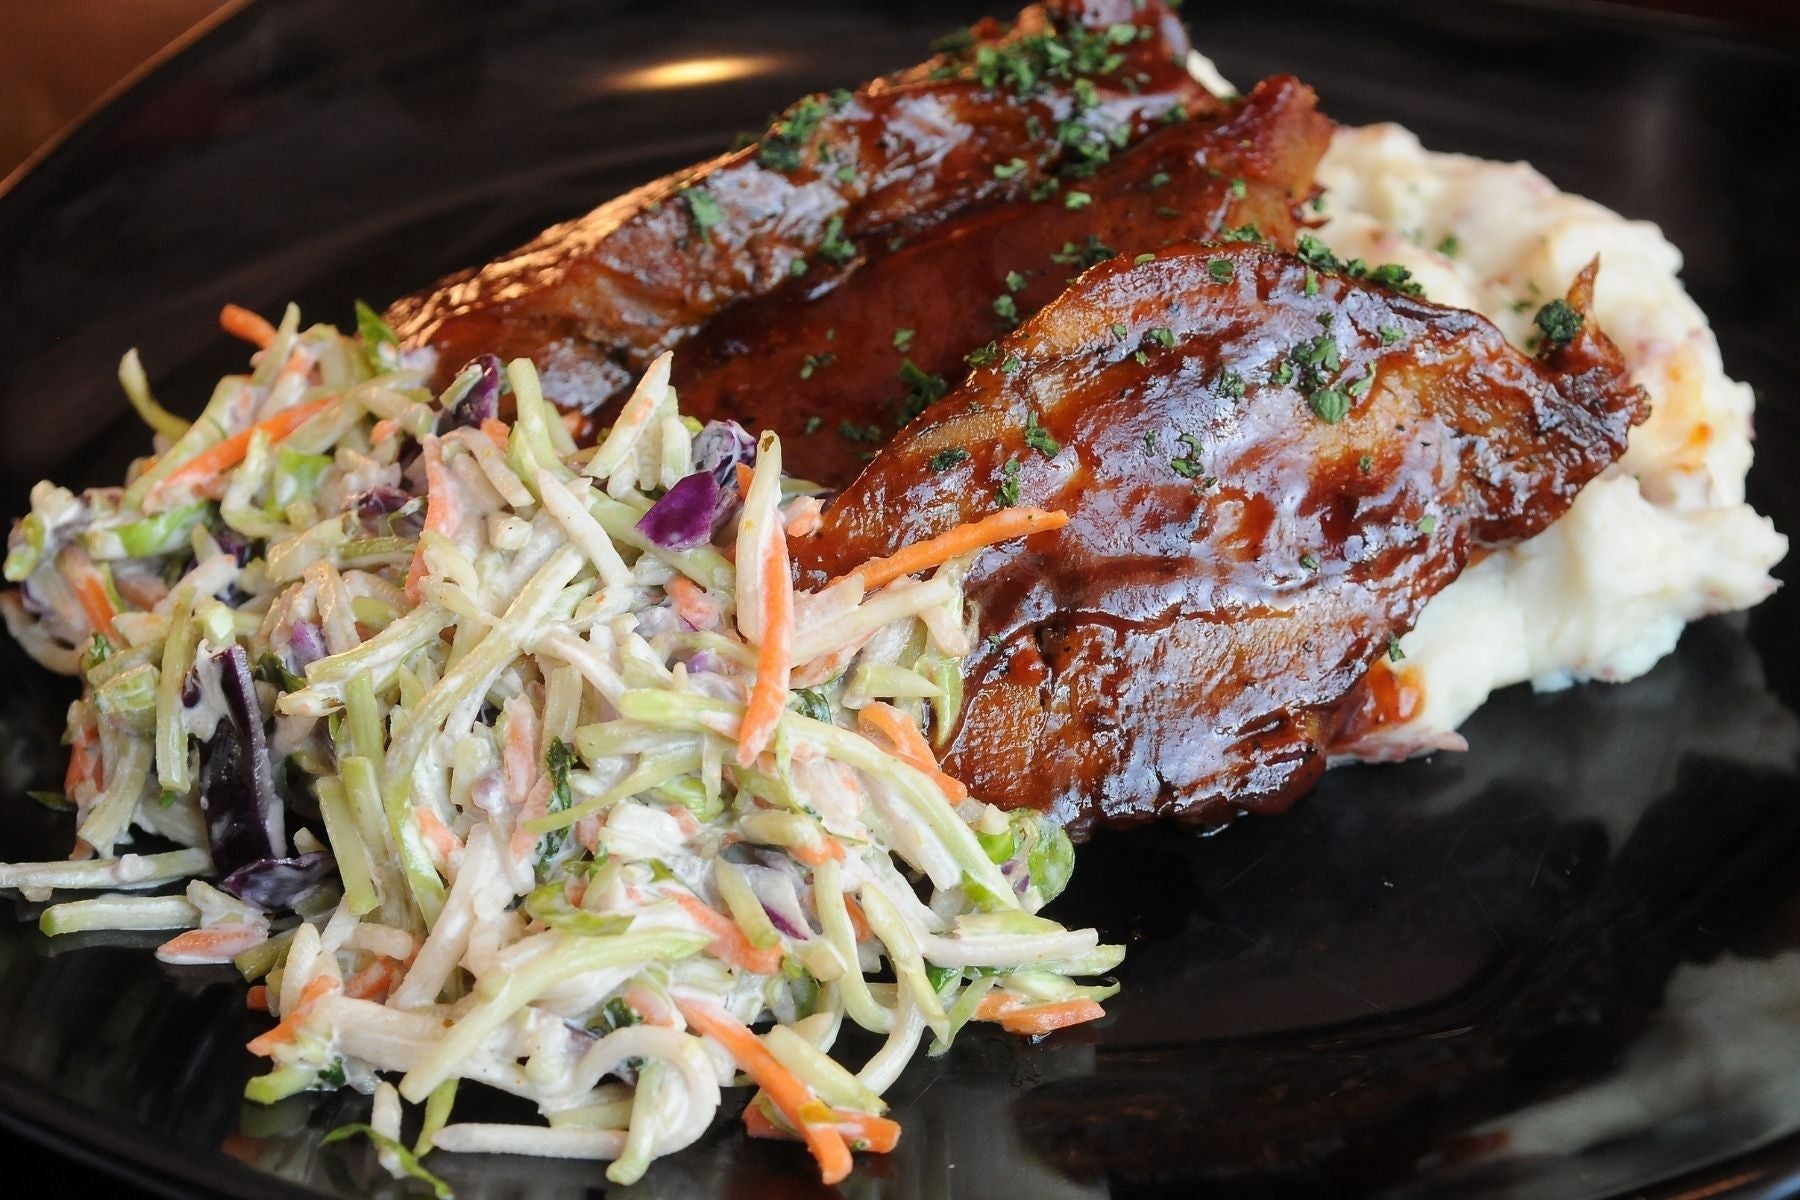 Barbecued lamb riblets with mashed potatoes and coleslaw